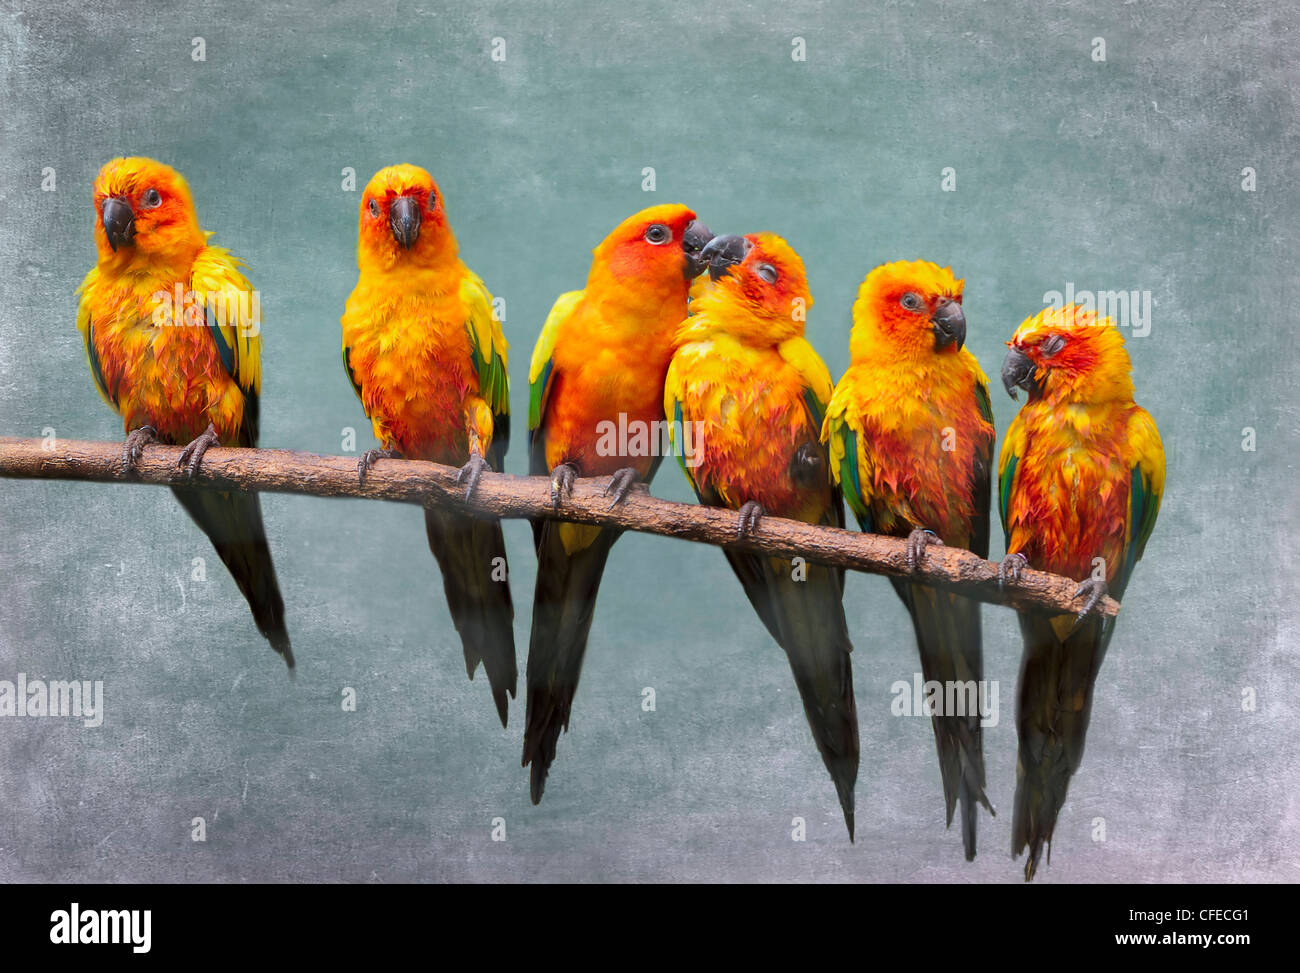 Sun Parakeet or Sun Conure, Aratinga solstitialis. A row of pretty yellow parrots on a branch. Stock Photo